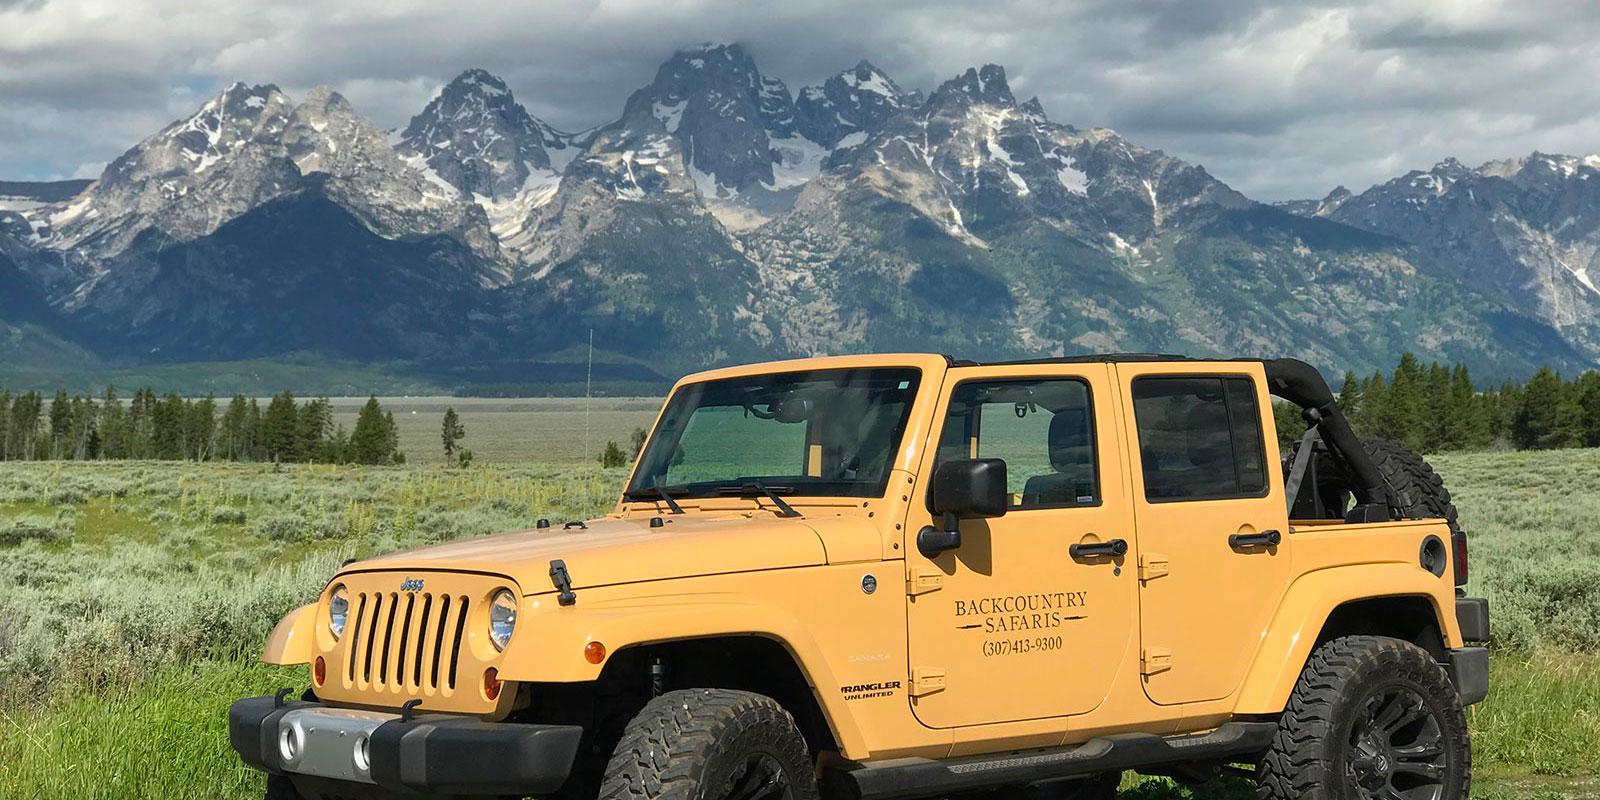 Jackson Hole Jeep Tour in Front of Tetons by Backcountry Safaris